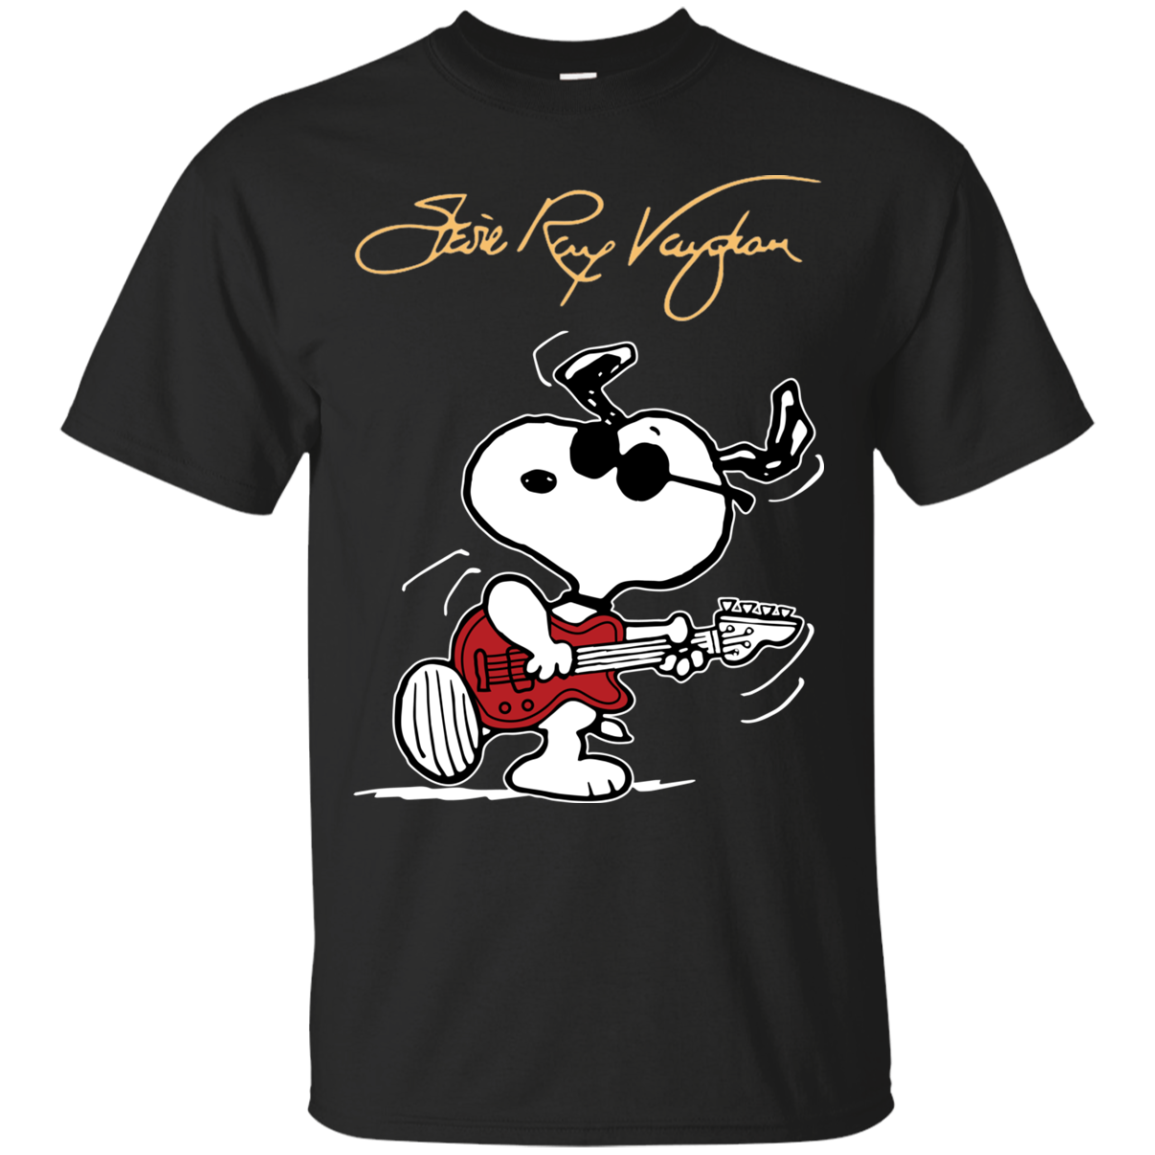 Stevie Ray Vaughan Snoopy Shirts Playing The Guitar - Teesmiley